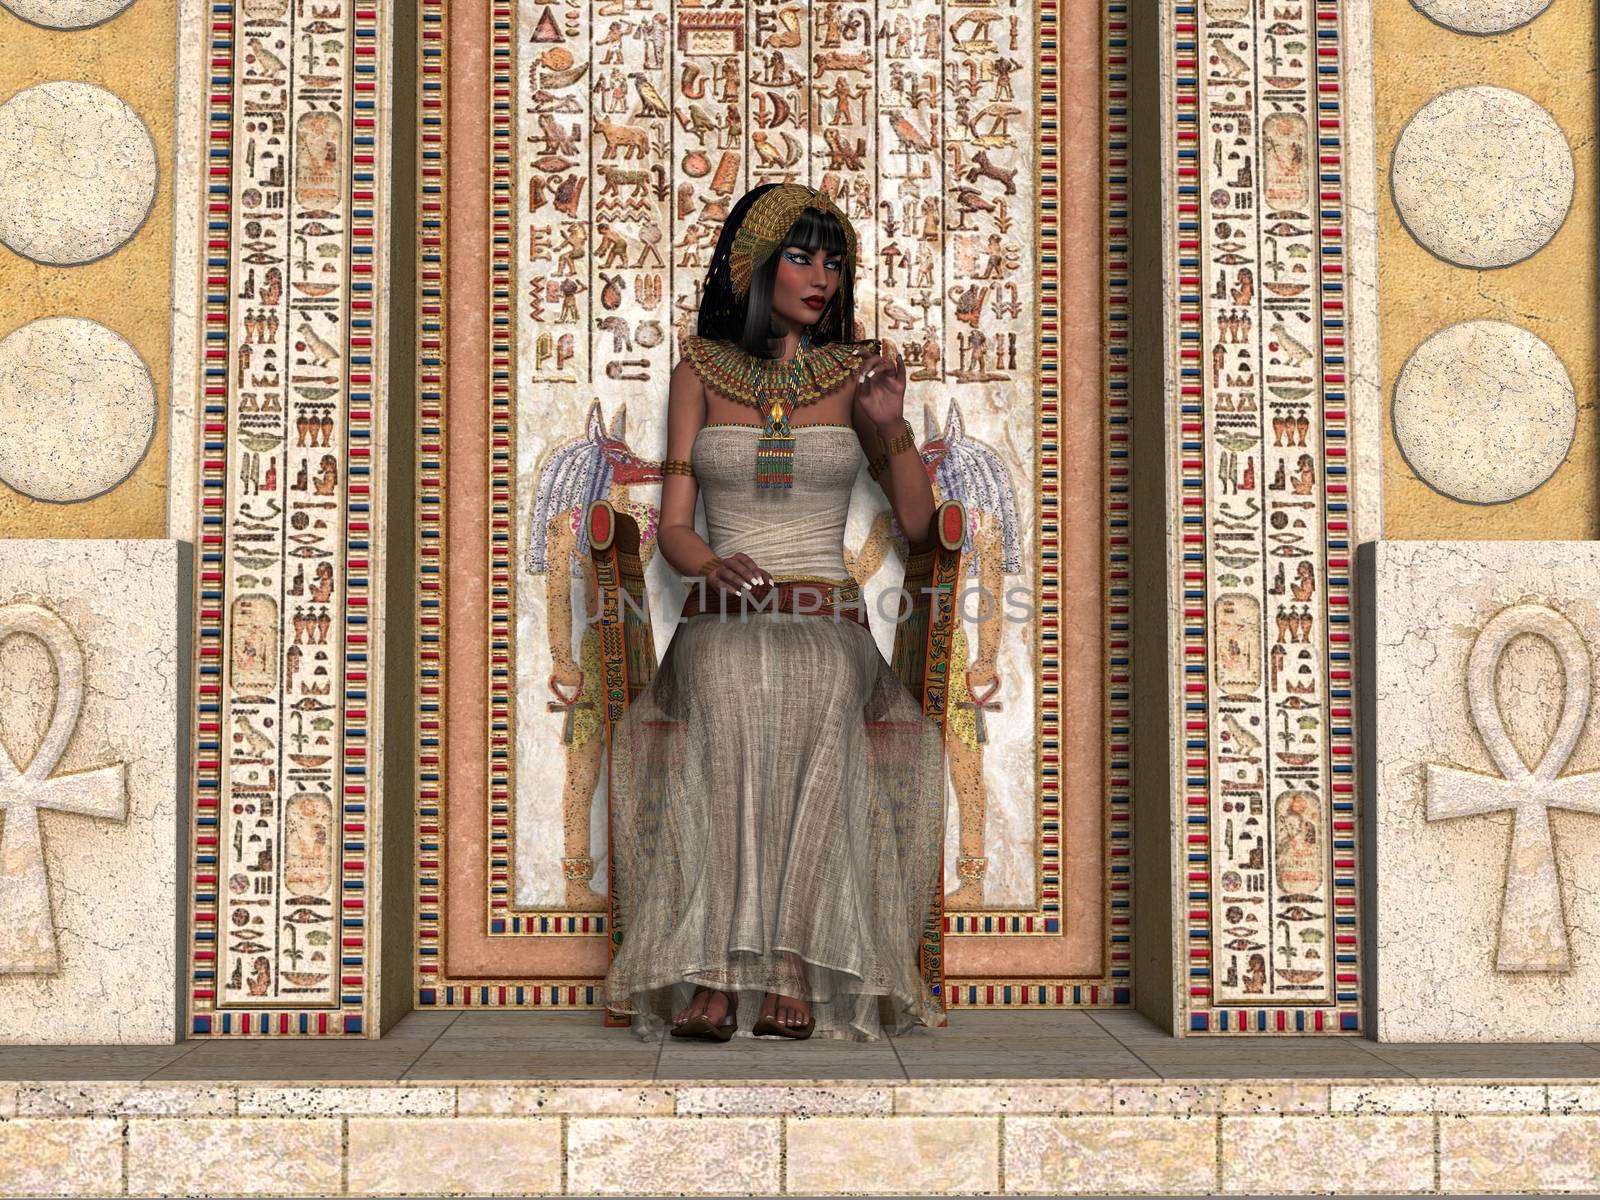 A young Egyptian princess sits on a throne in the Old Kingdom surrounded by hieroglyphs.